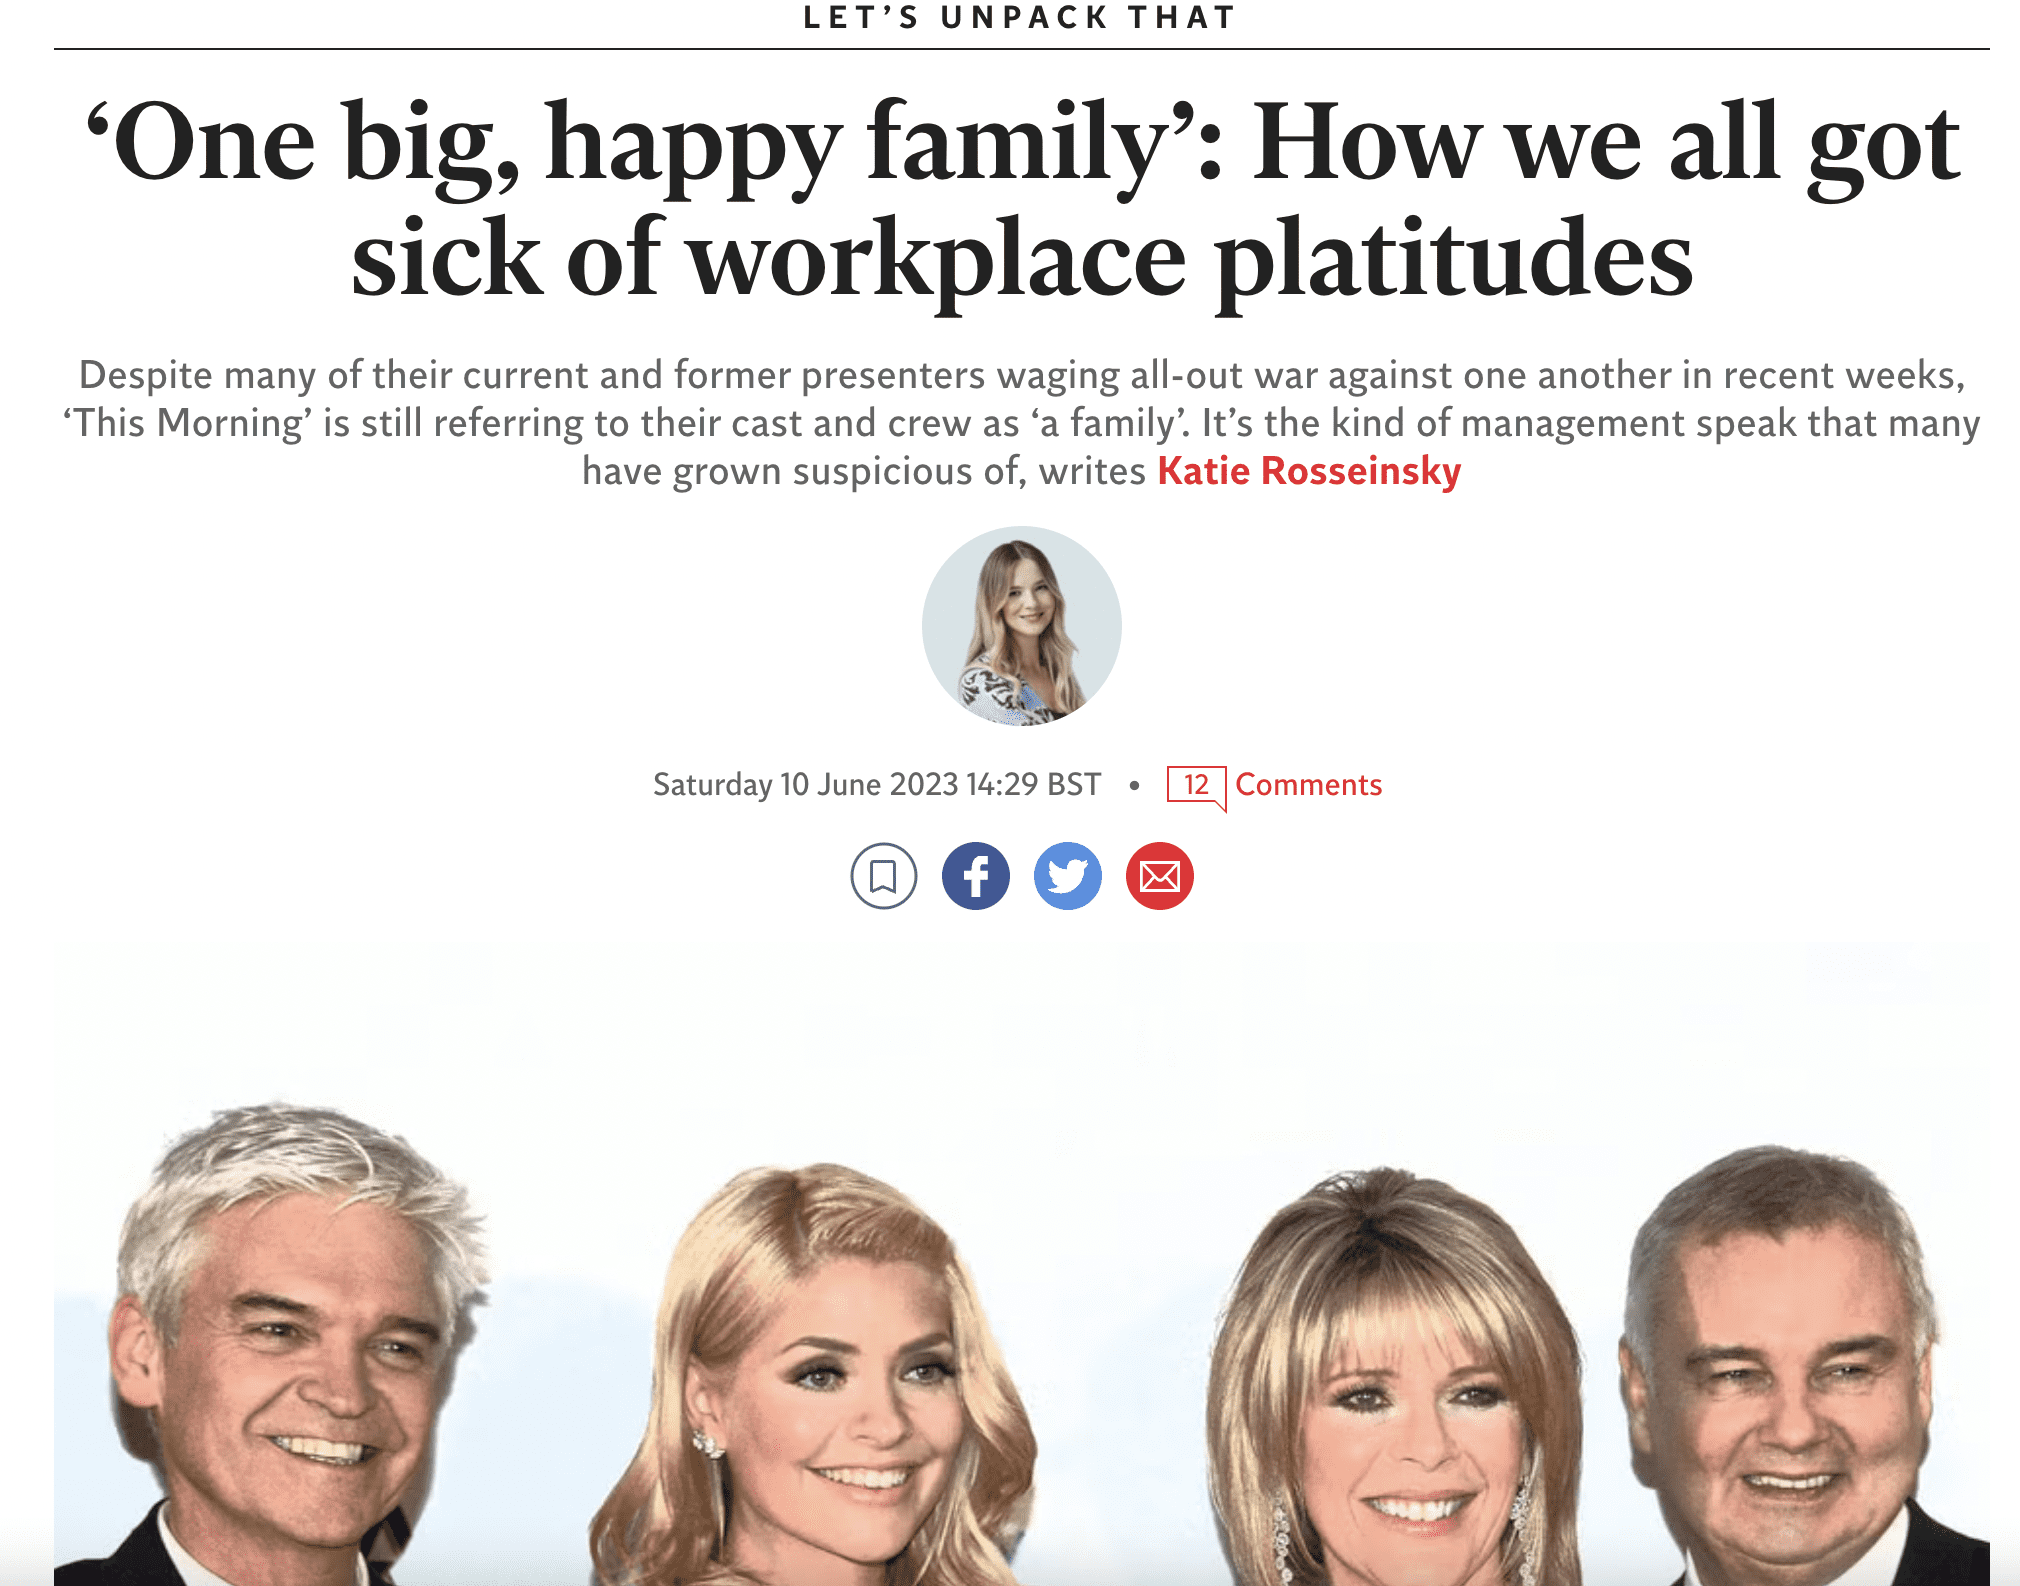 The Independent - June 2023

In this article, “‘One big, happy family’: How we all got sick of workplace platitudes” written by Katie Rosseinsky, Gina Visram contributes some thoughts on terminology used to describe workplaces (following the developments at This Morning in spring/summer 2023) 